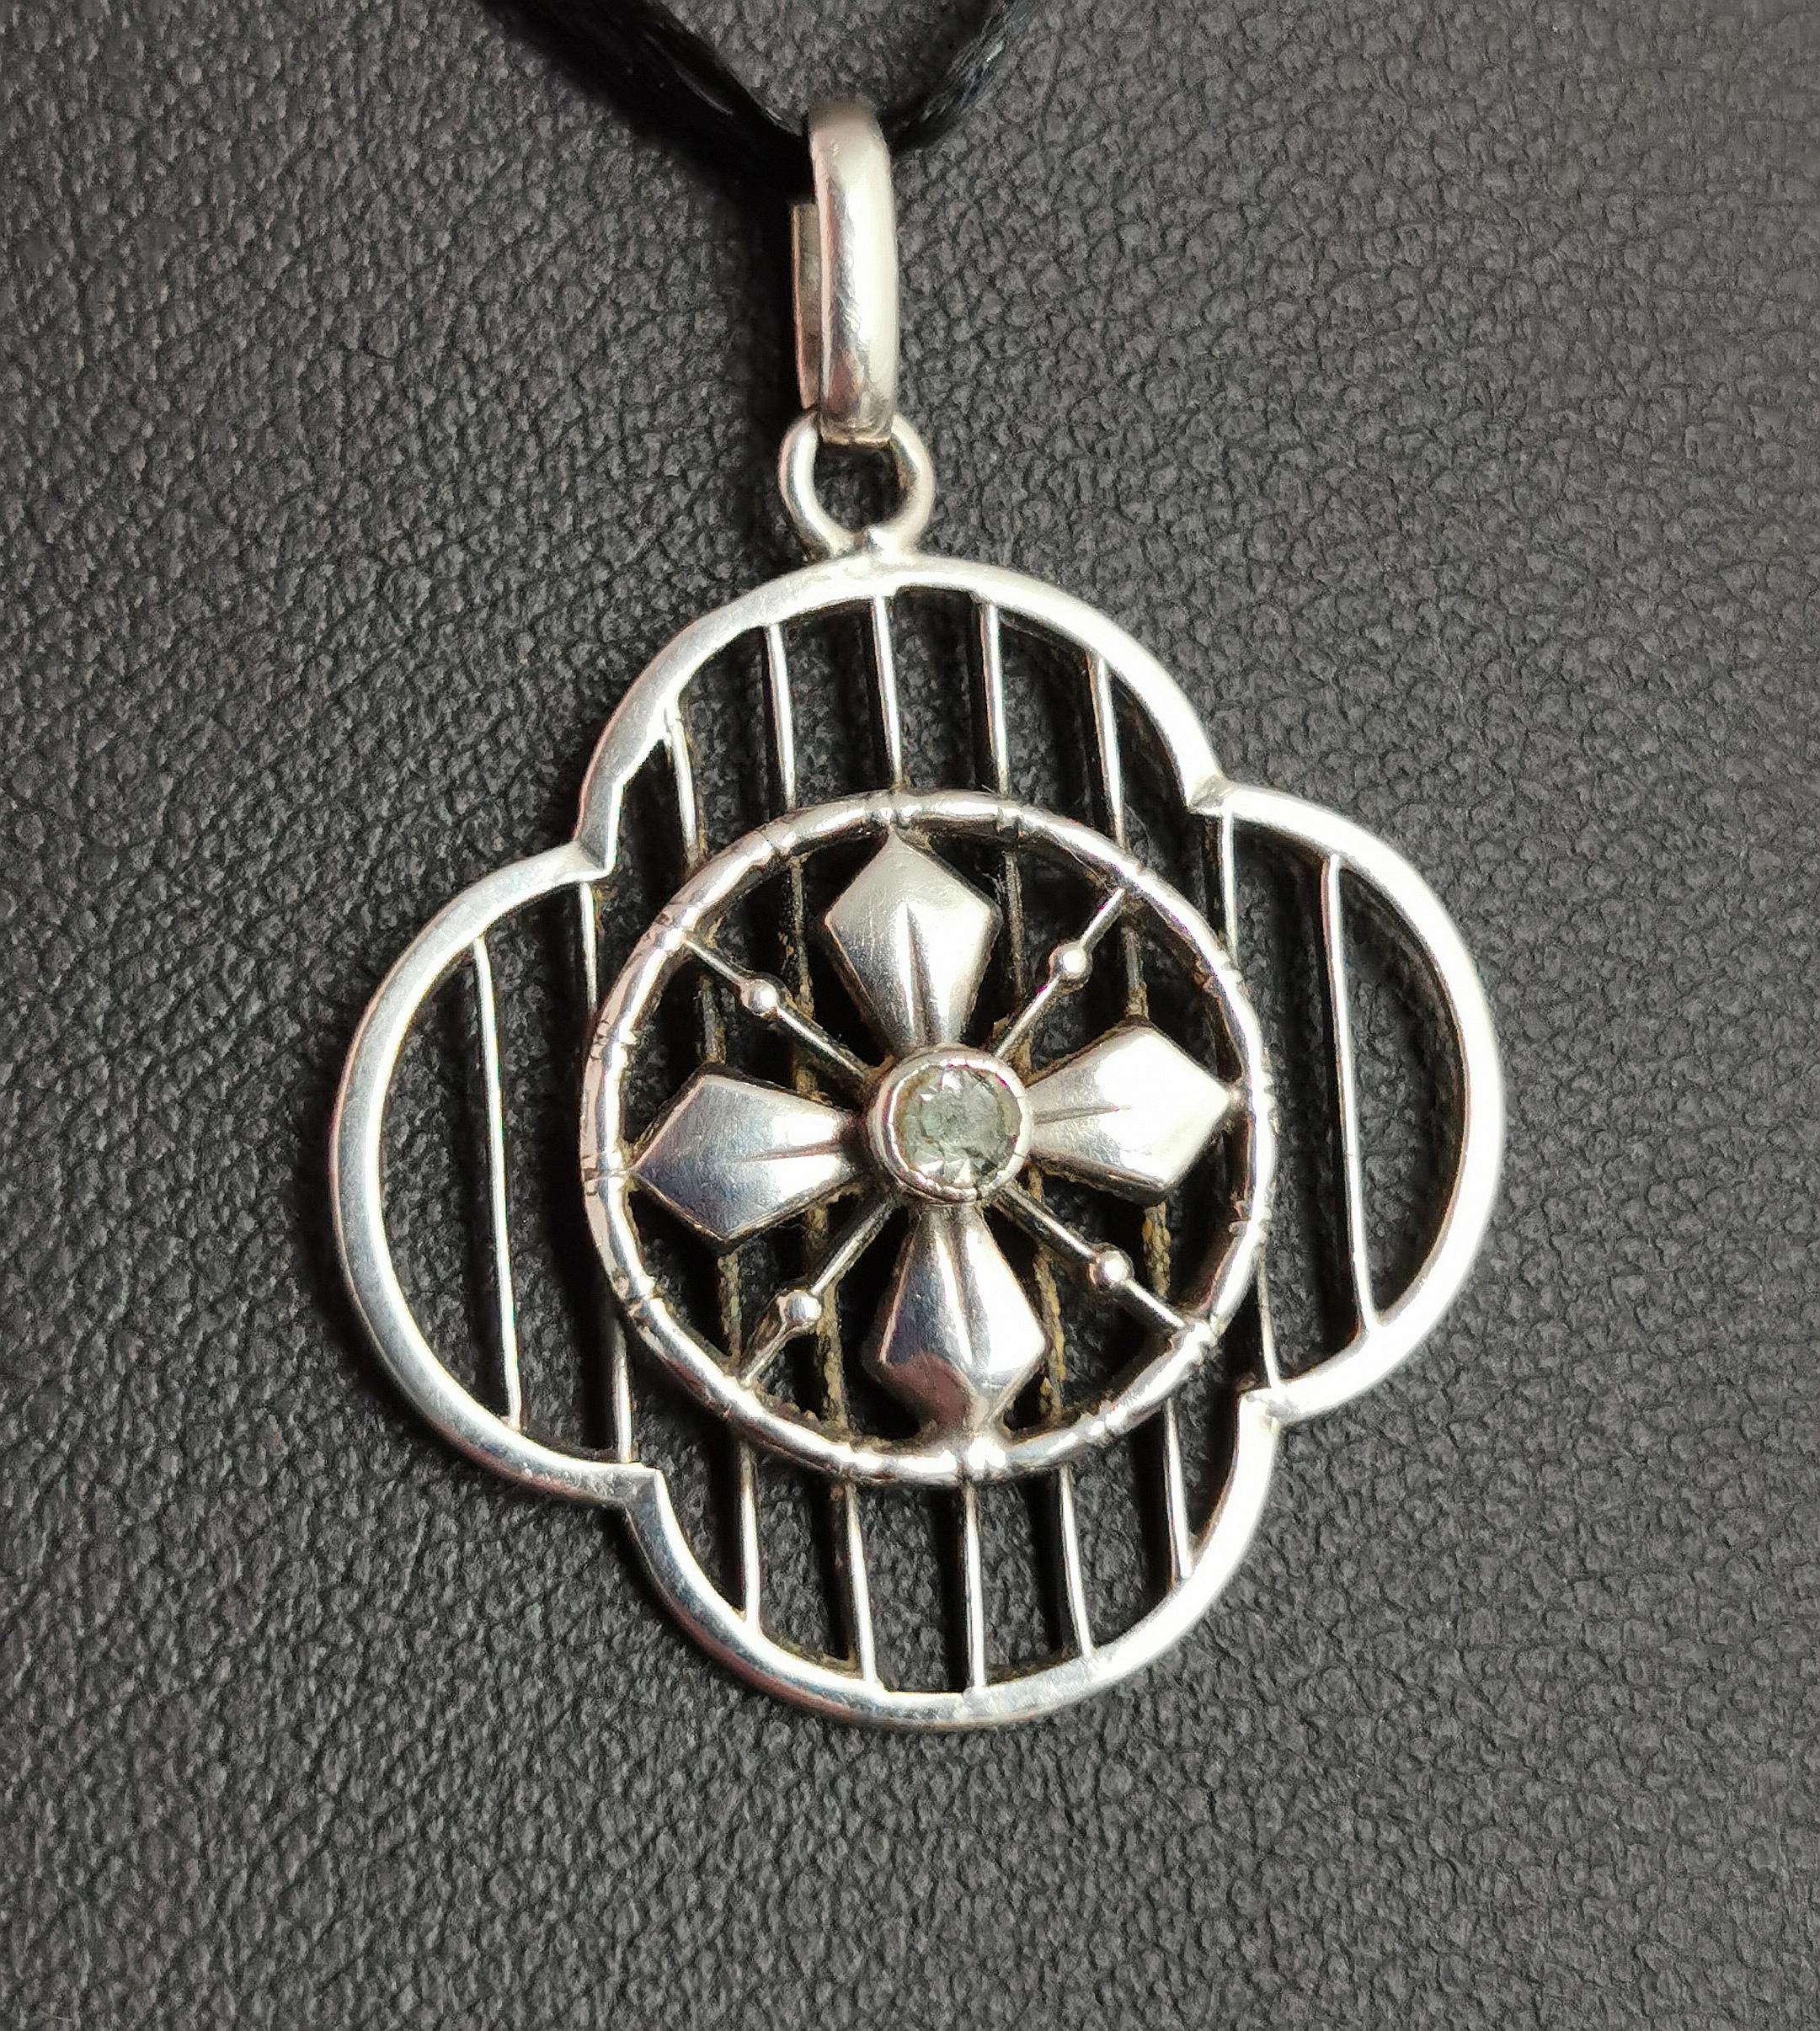 A beautiful little Arts and Crafts era silver and paste pendant.

It is crafted in sterling silver and set with a single clear paste stone.

The pendant has a pretty openwork design with a Quatrefoil shape, geometric vertical lines and a central